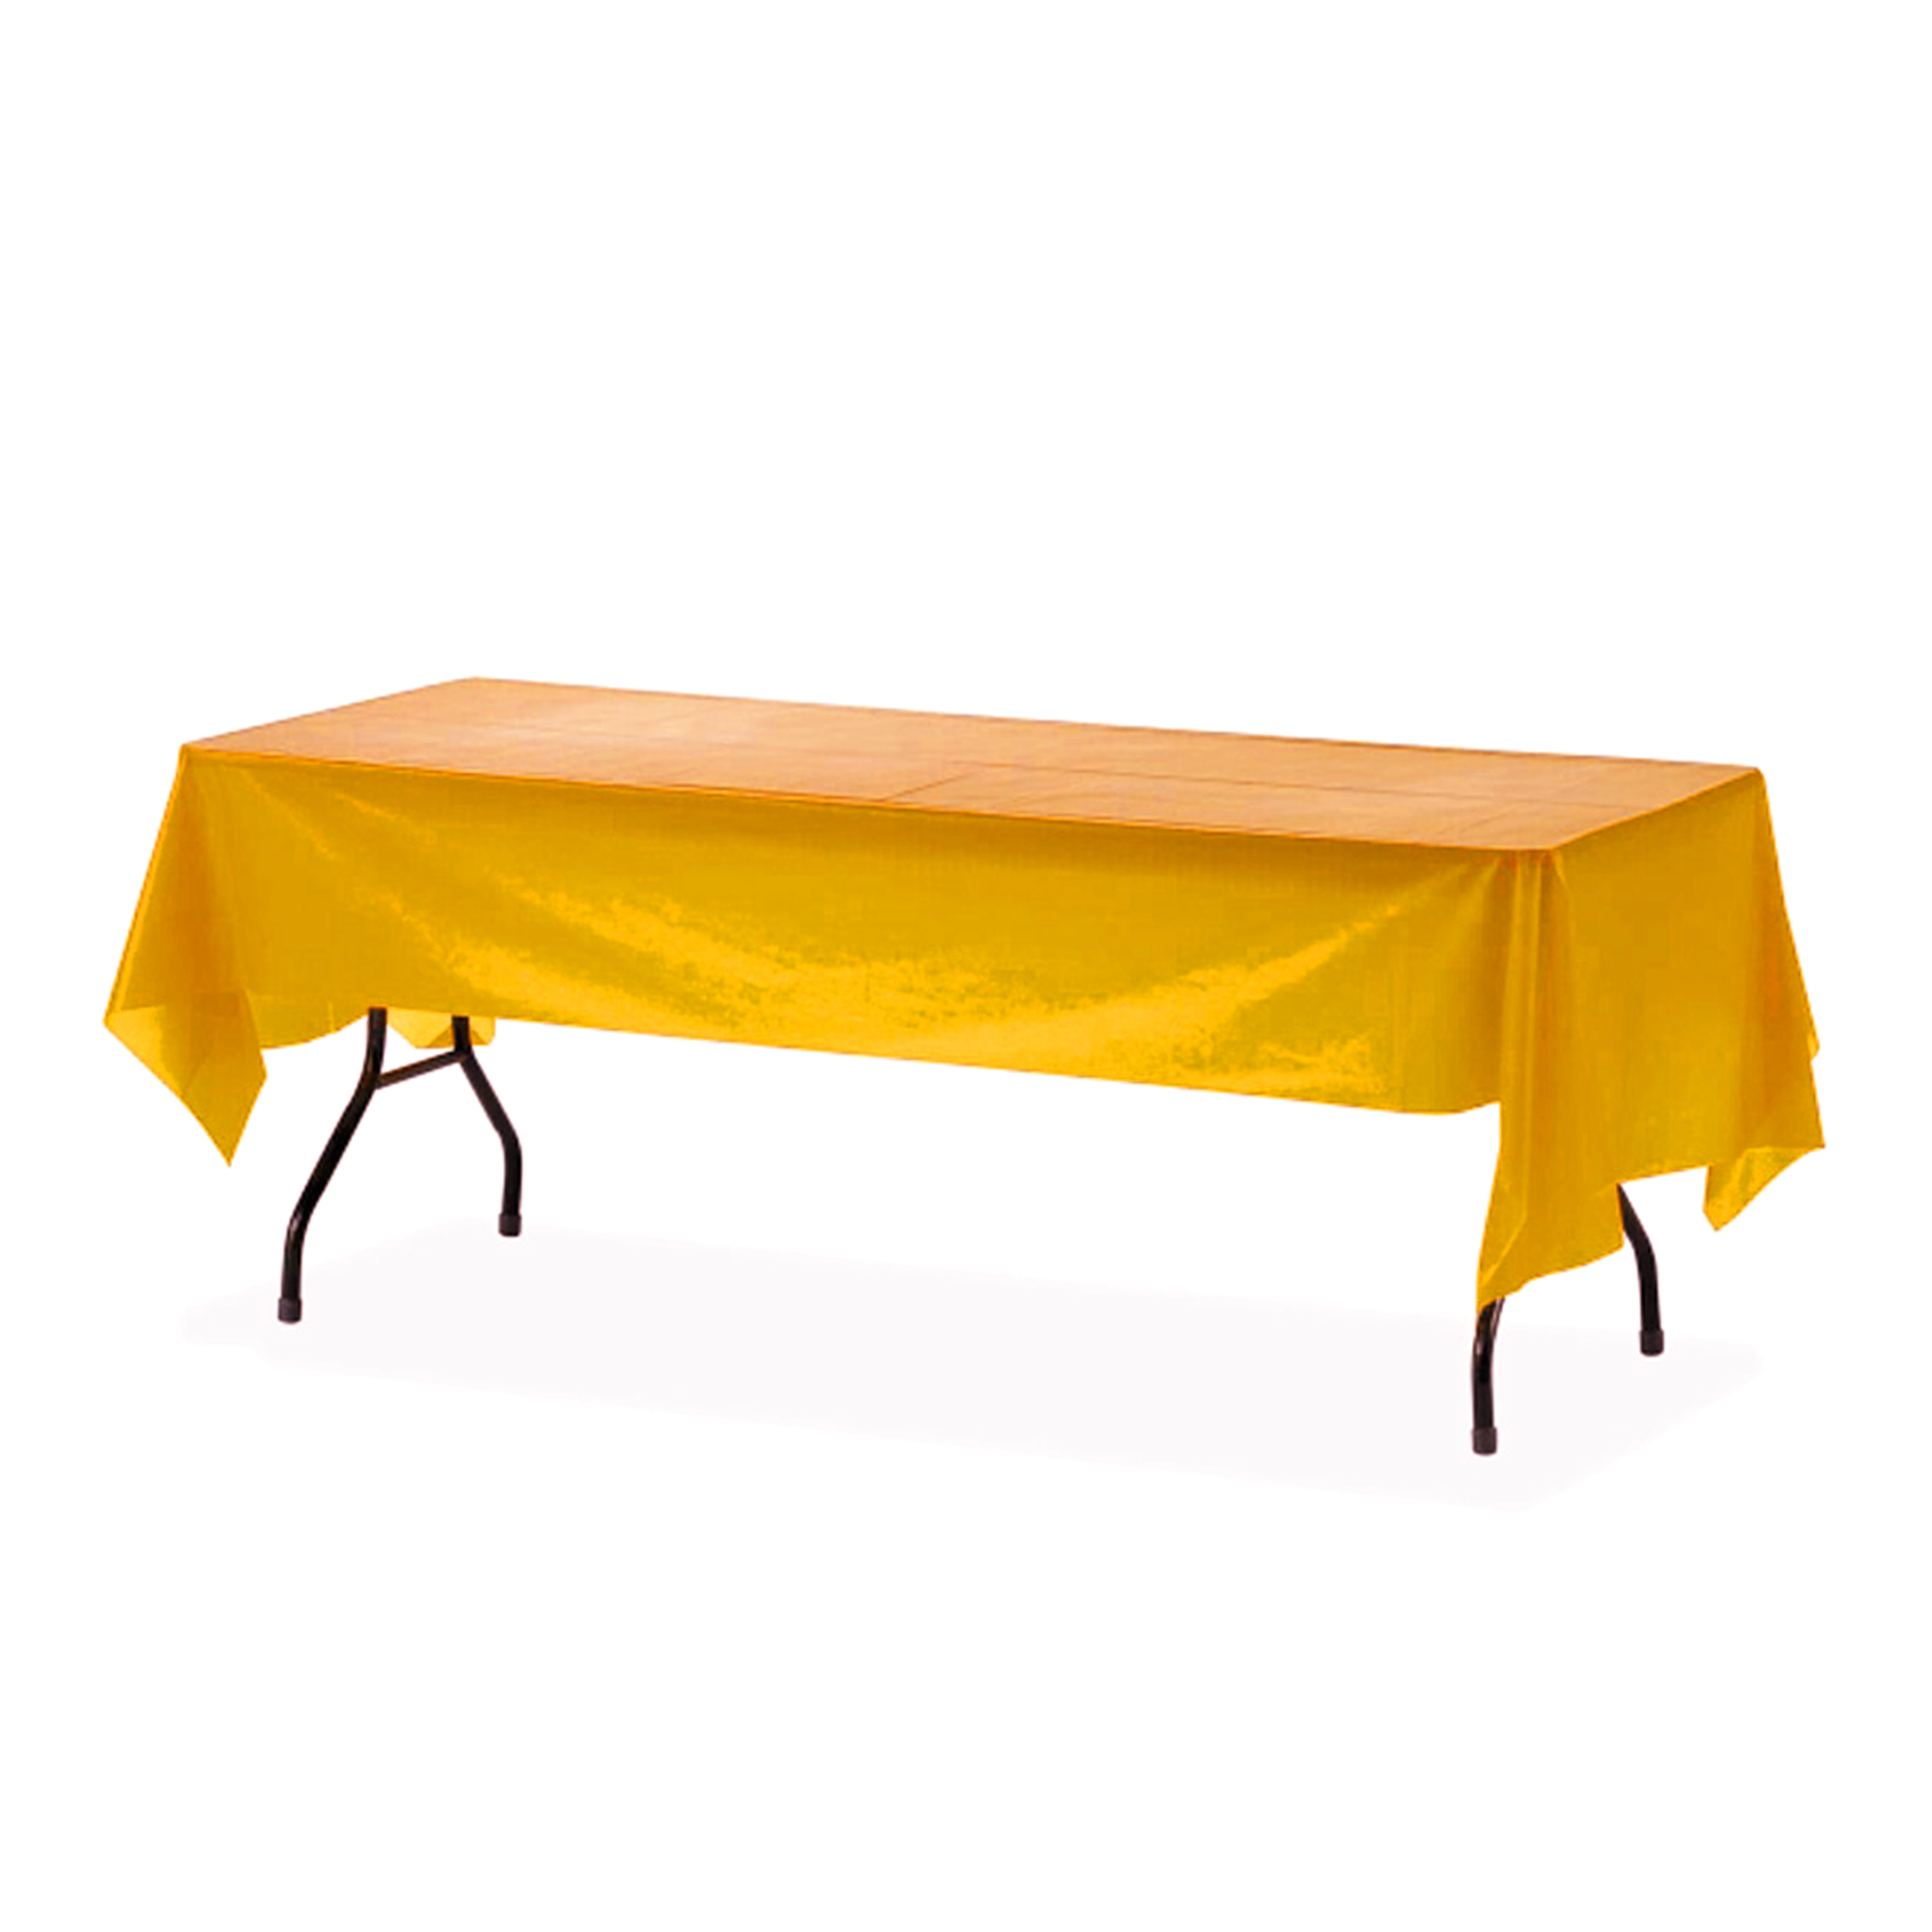 Plastic Rectangle Table Covers - School Bus Yellow 54" x 108"